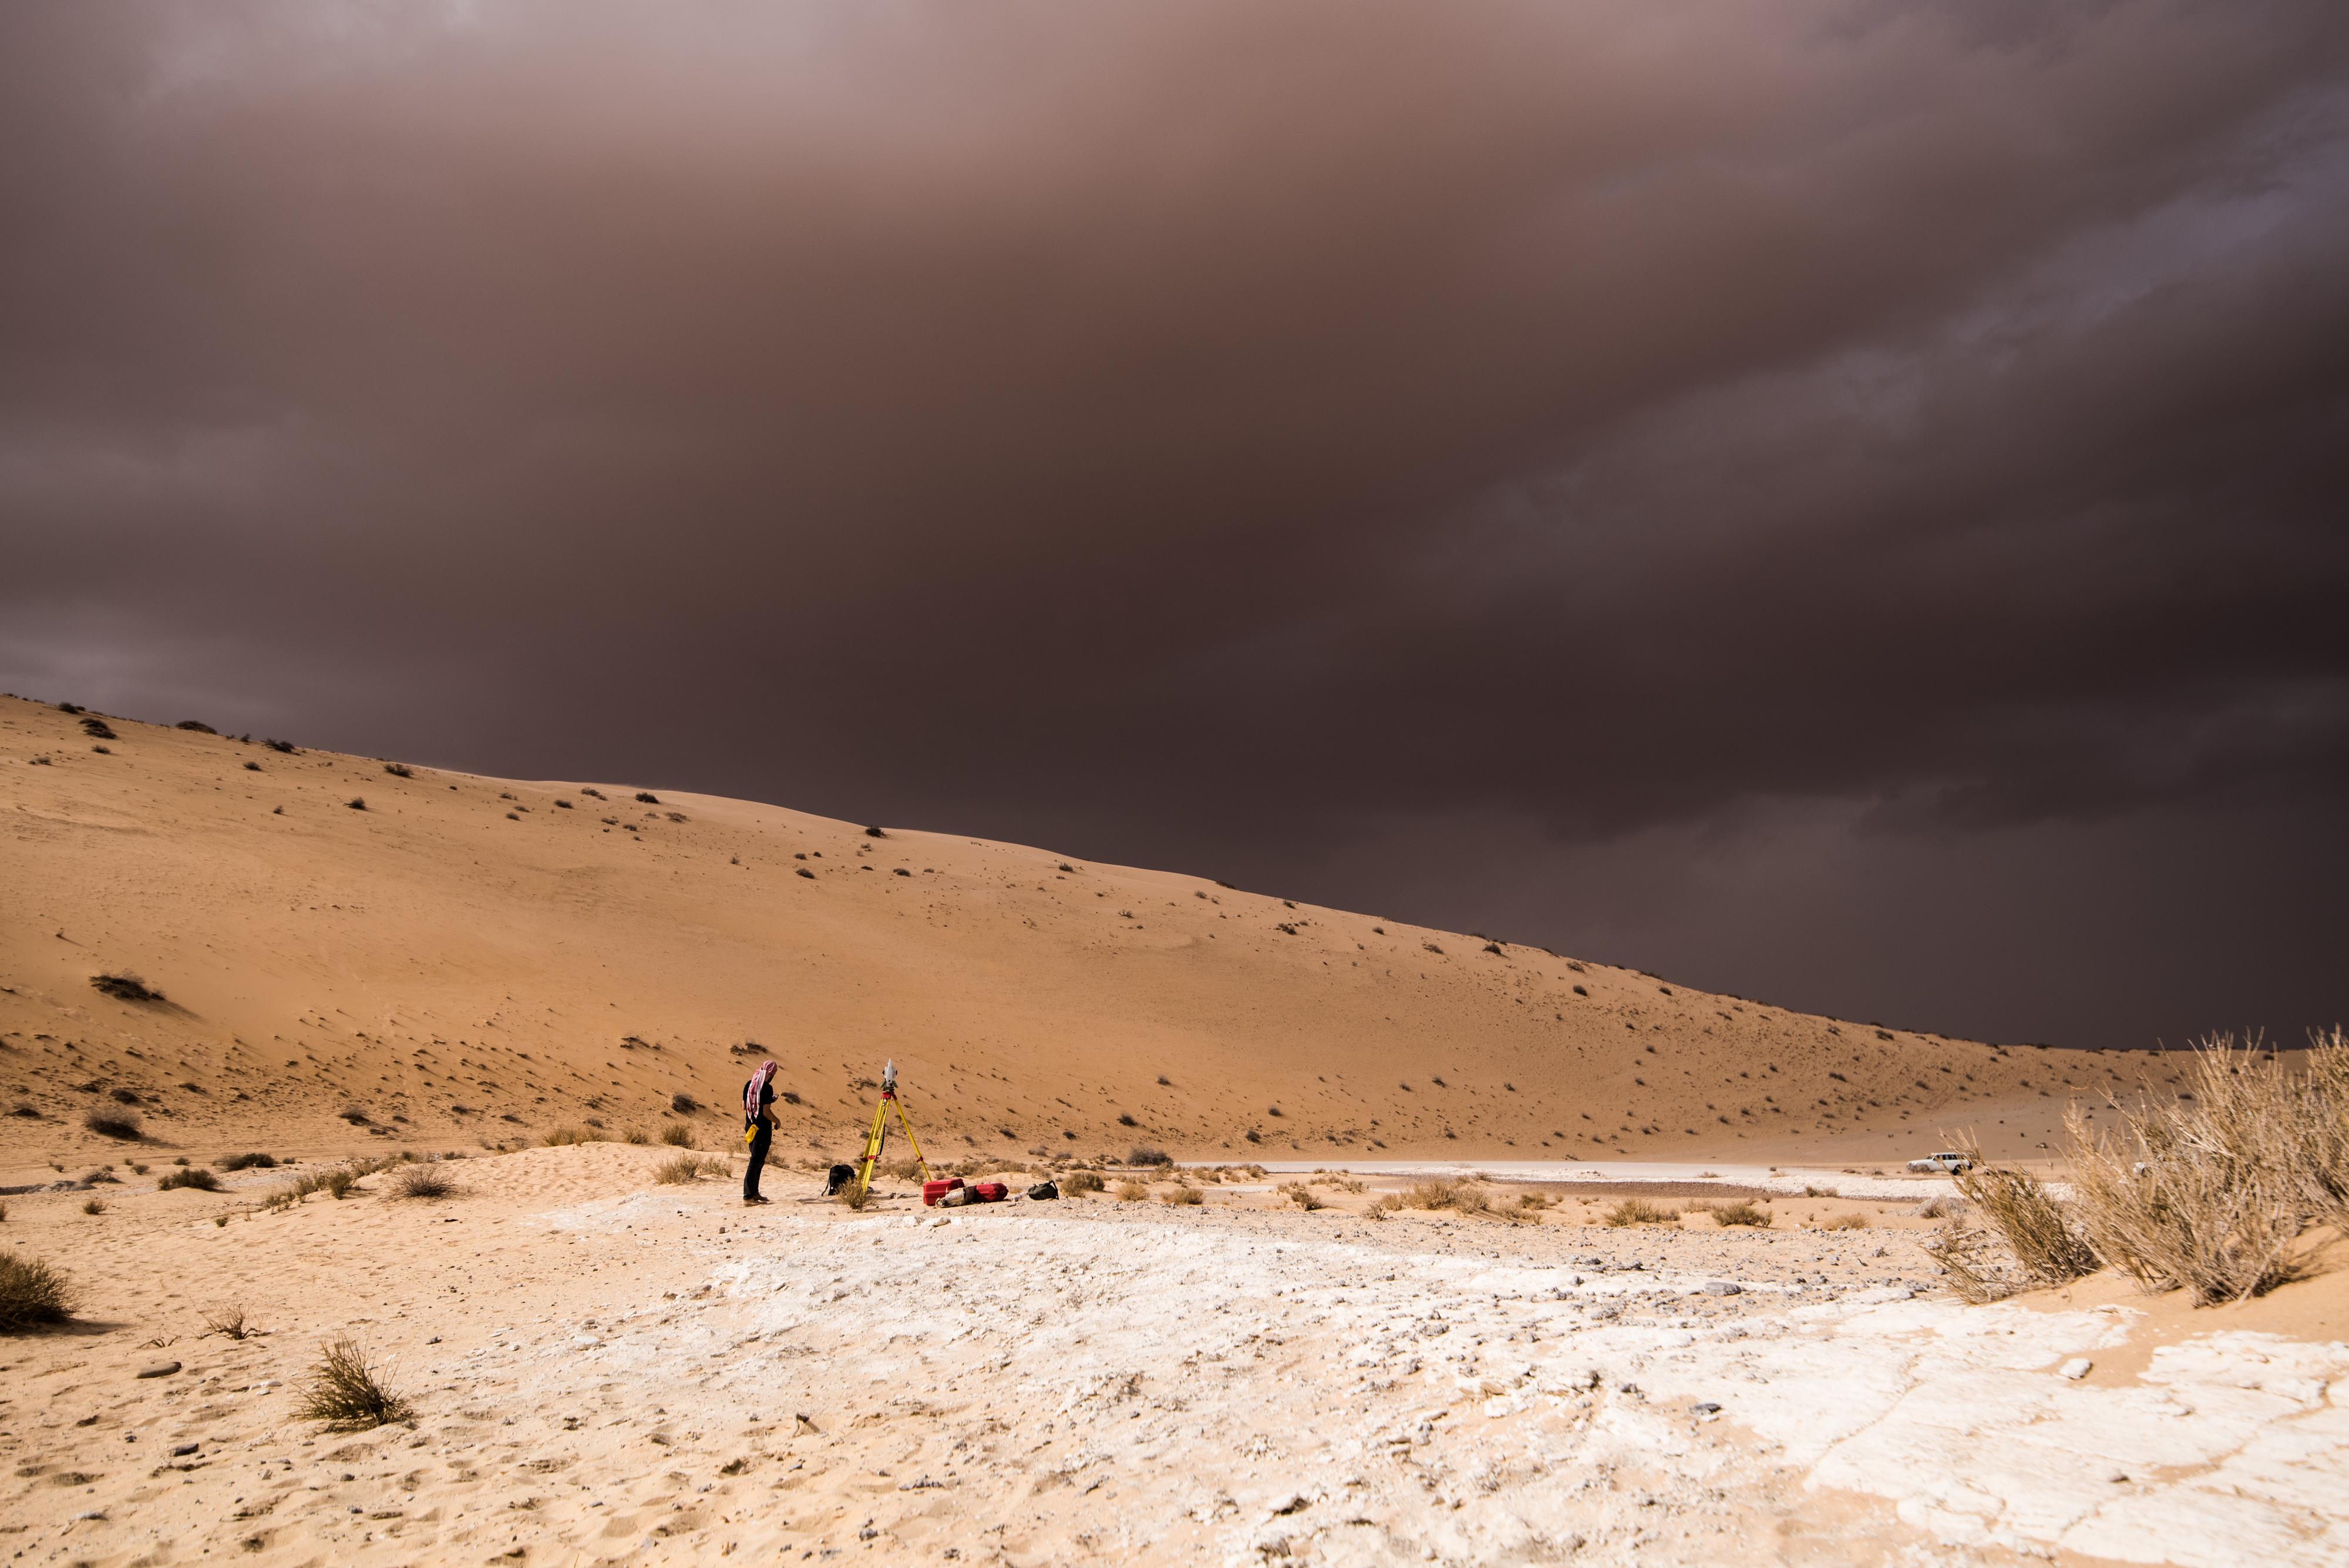 File: A storm arrives during an archaeological excavation of the remains of an ancient lake in northern Saudi Arabia, where ancient humans lived alongside animals like hippos